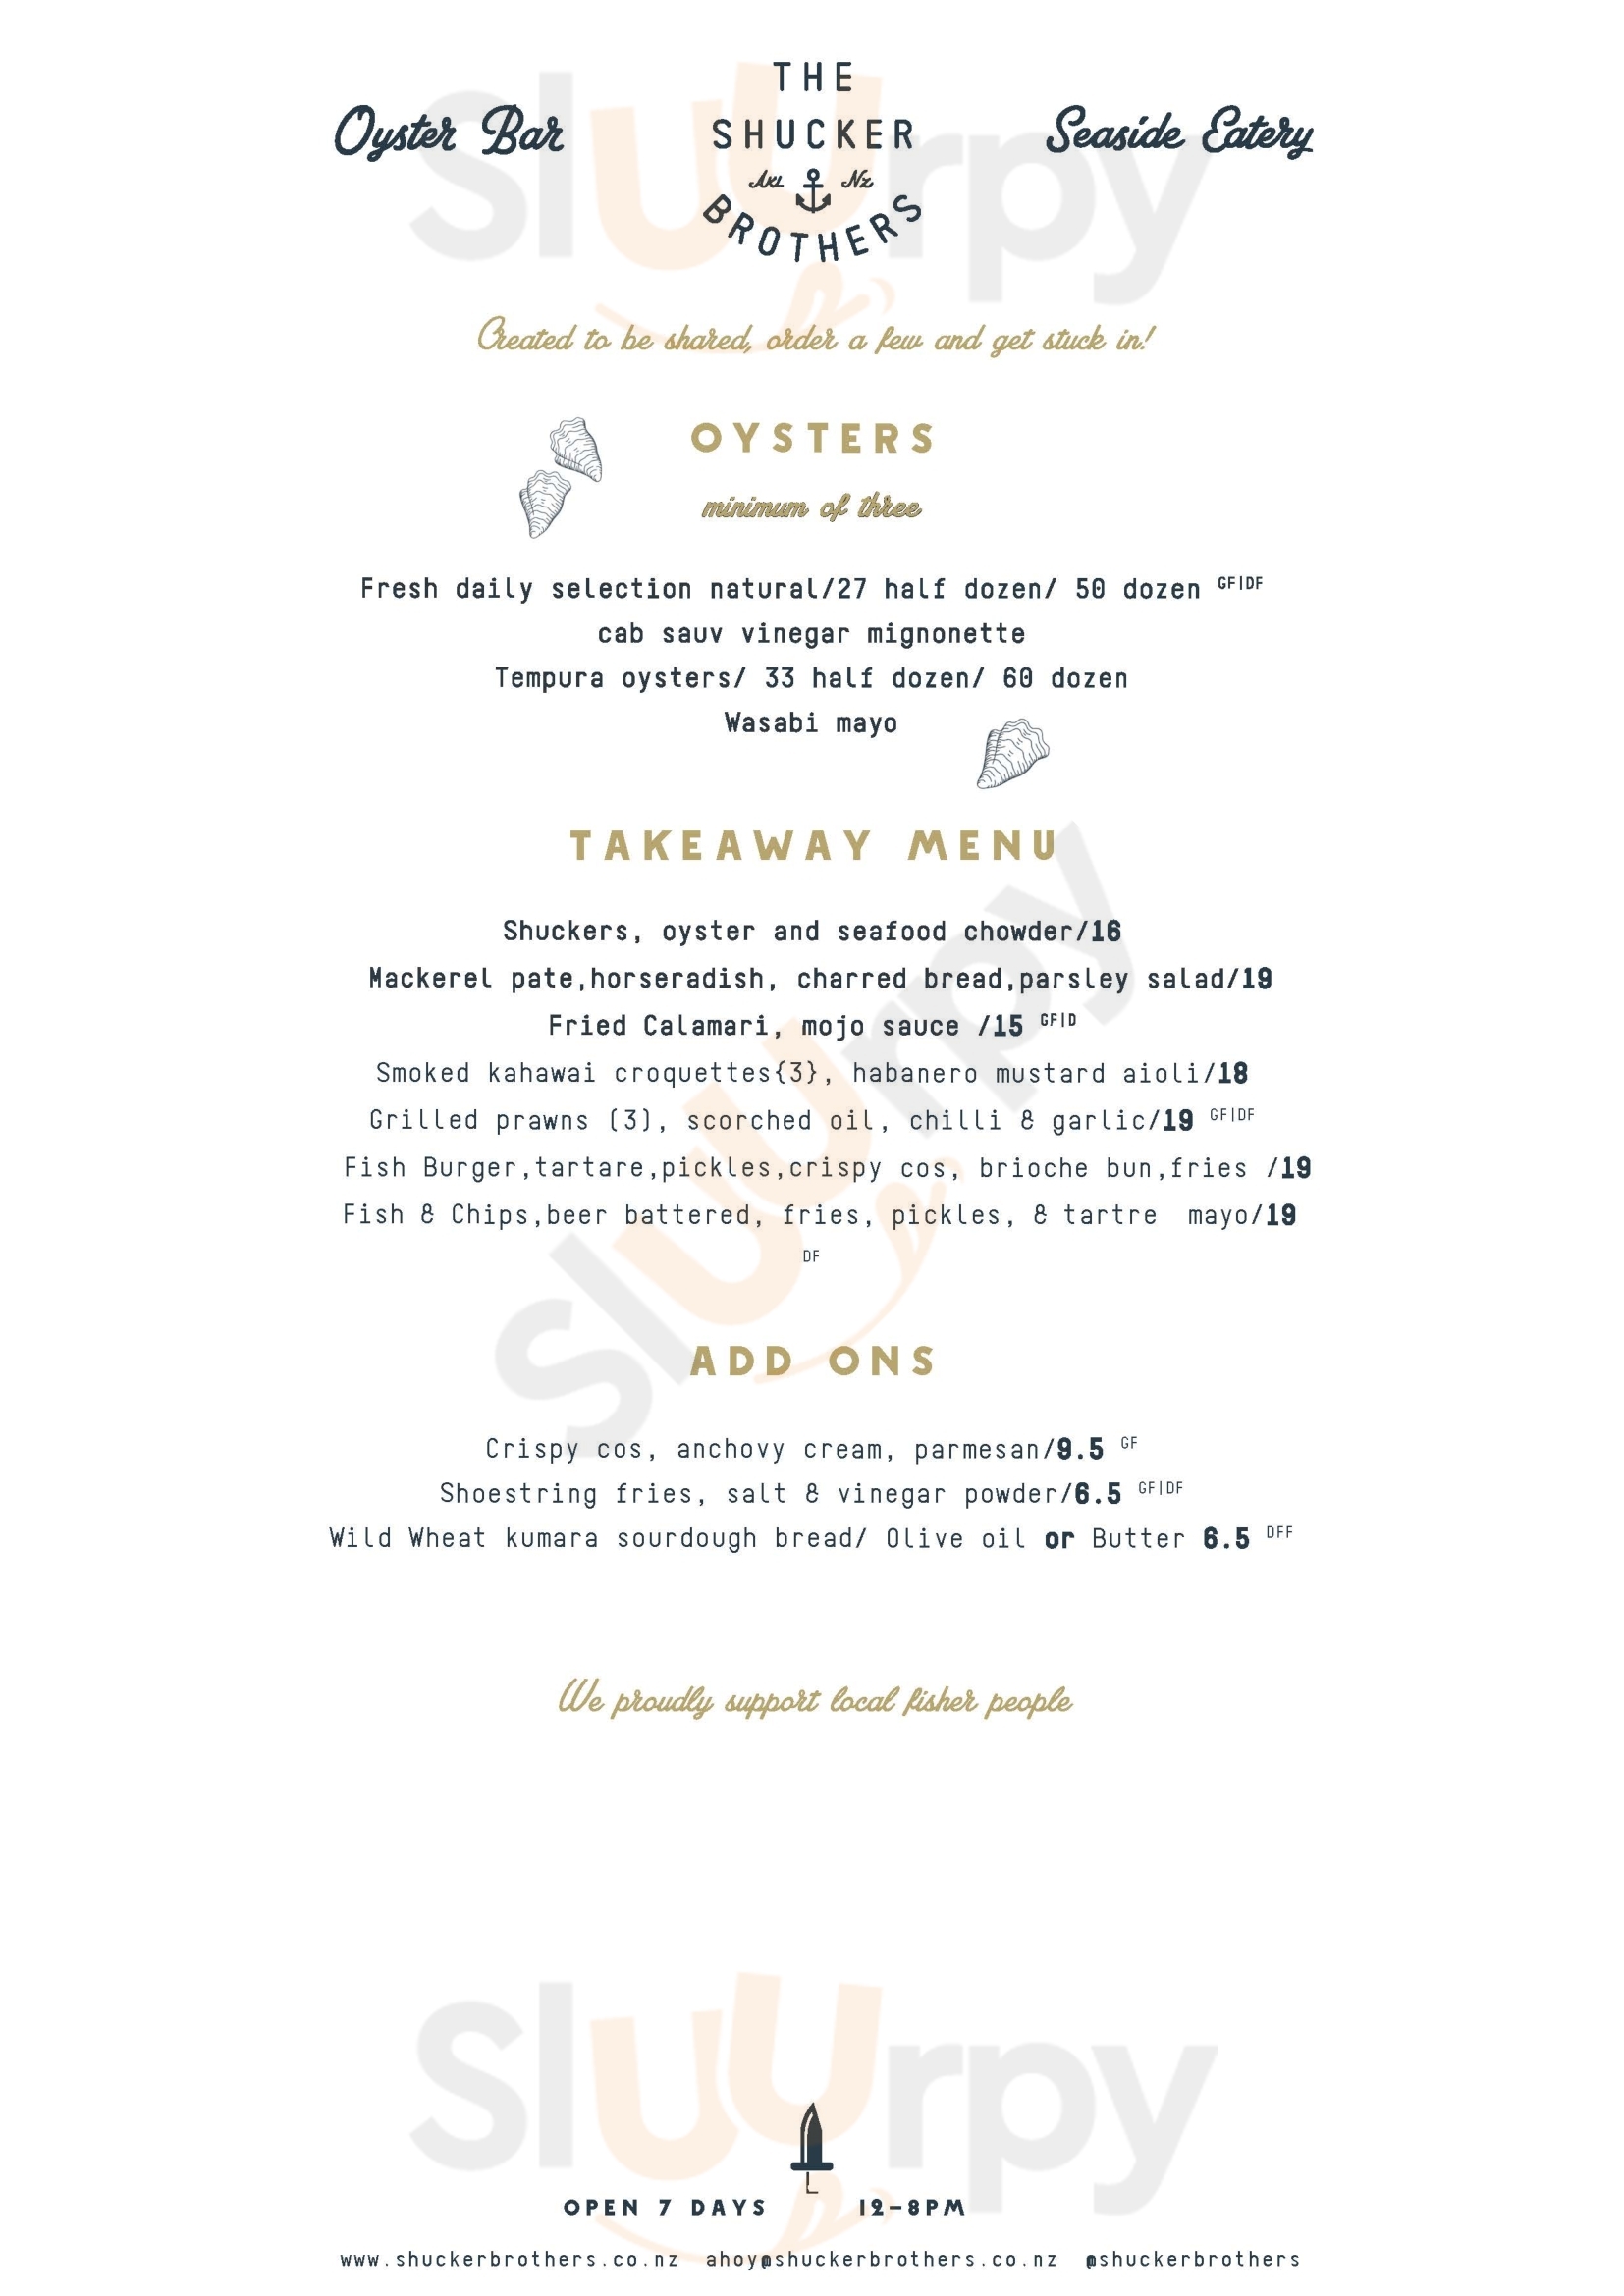 The Shucker Brothers Auckland Central Menu - 1